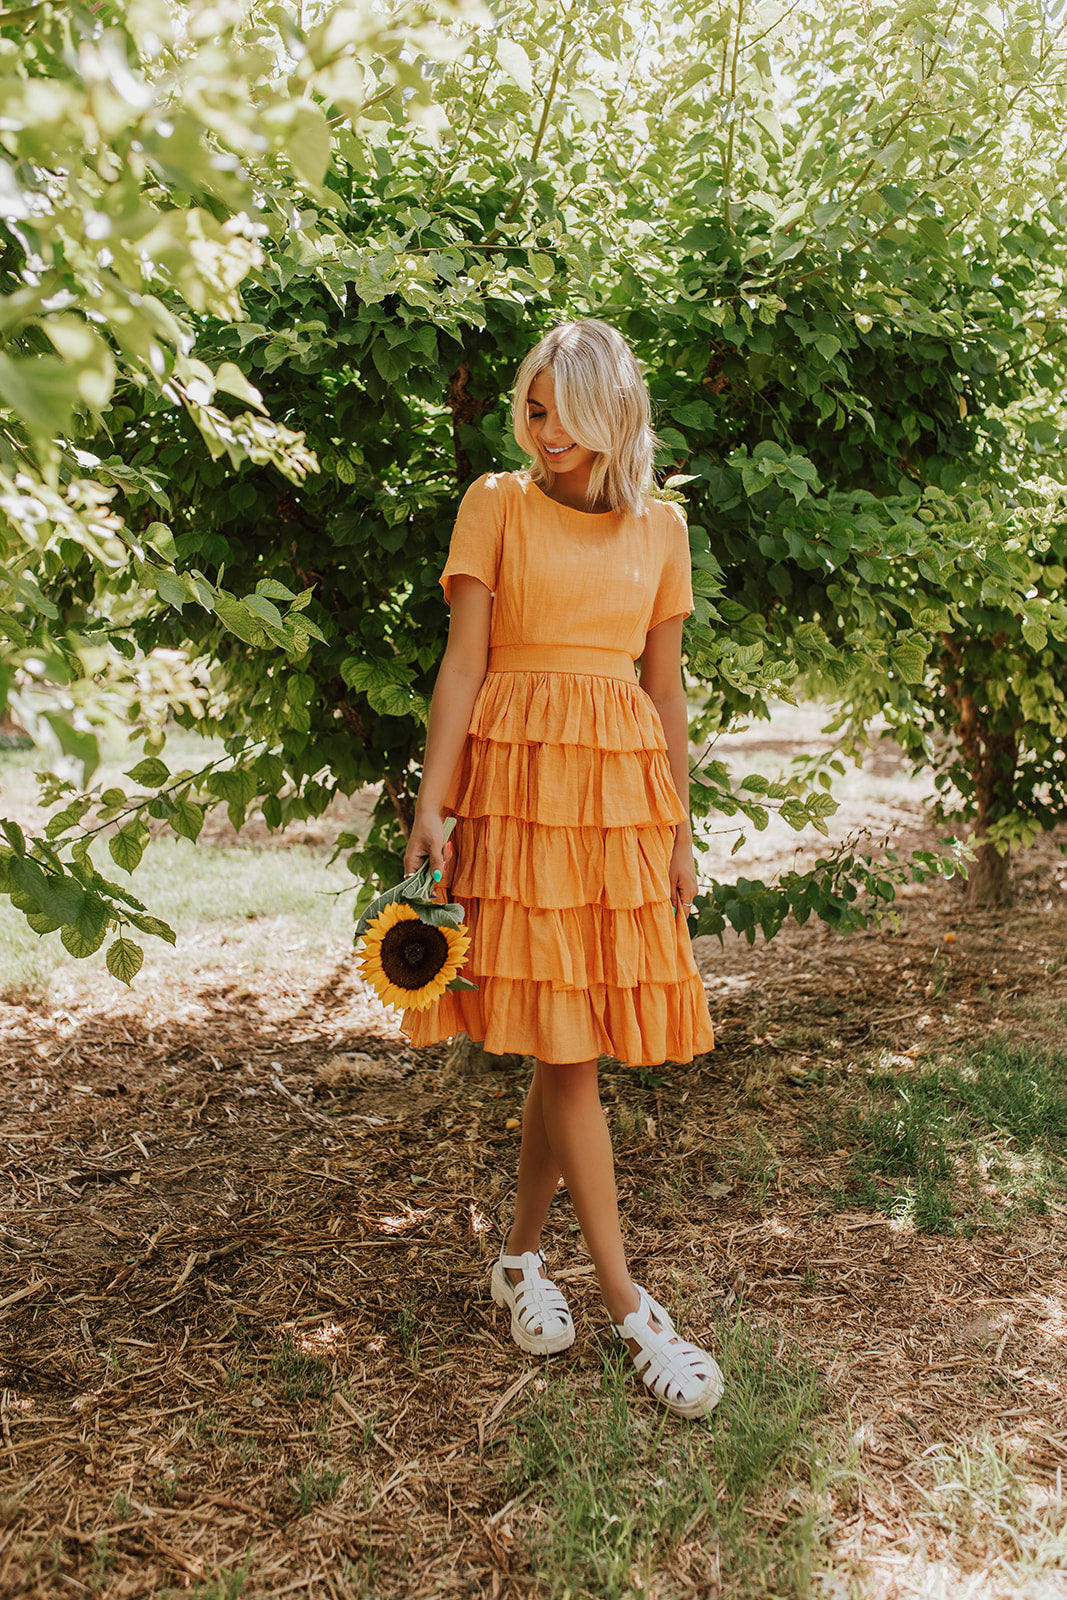 THE TIERED RUFFLED DRESS IN CLEMENTINE BY PINK DESERT – Pink Desert